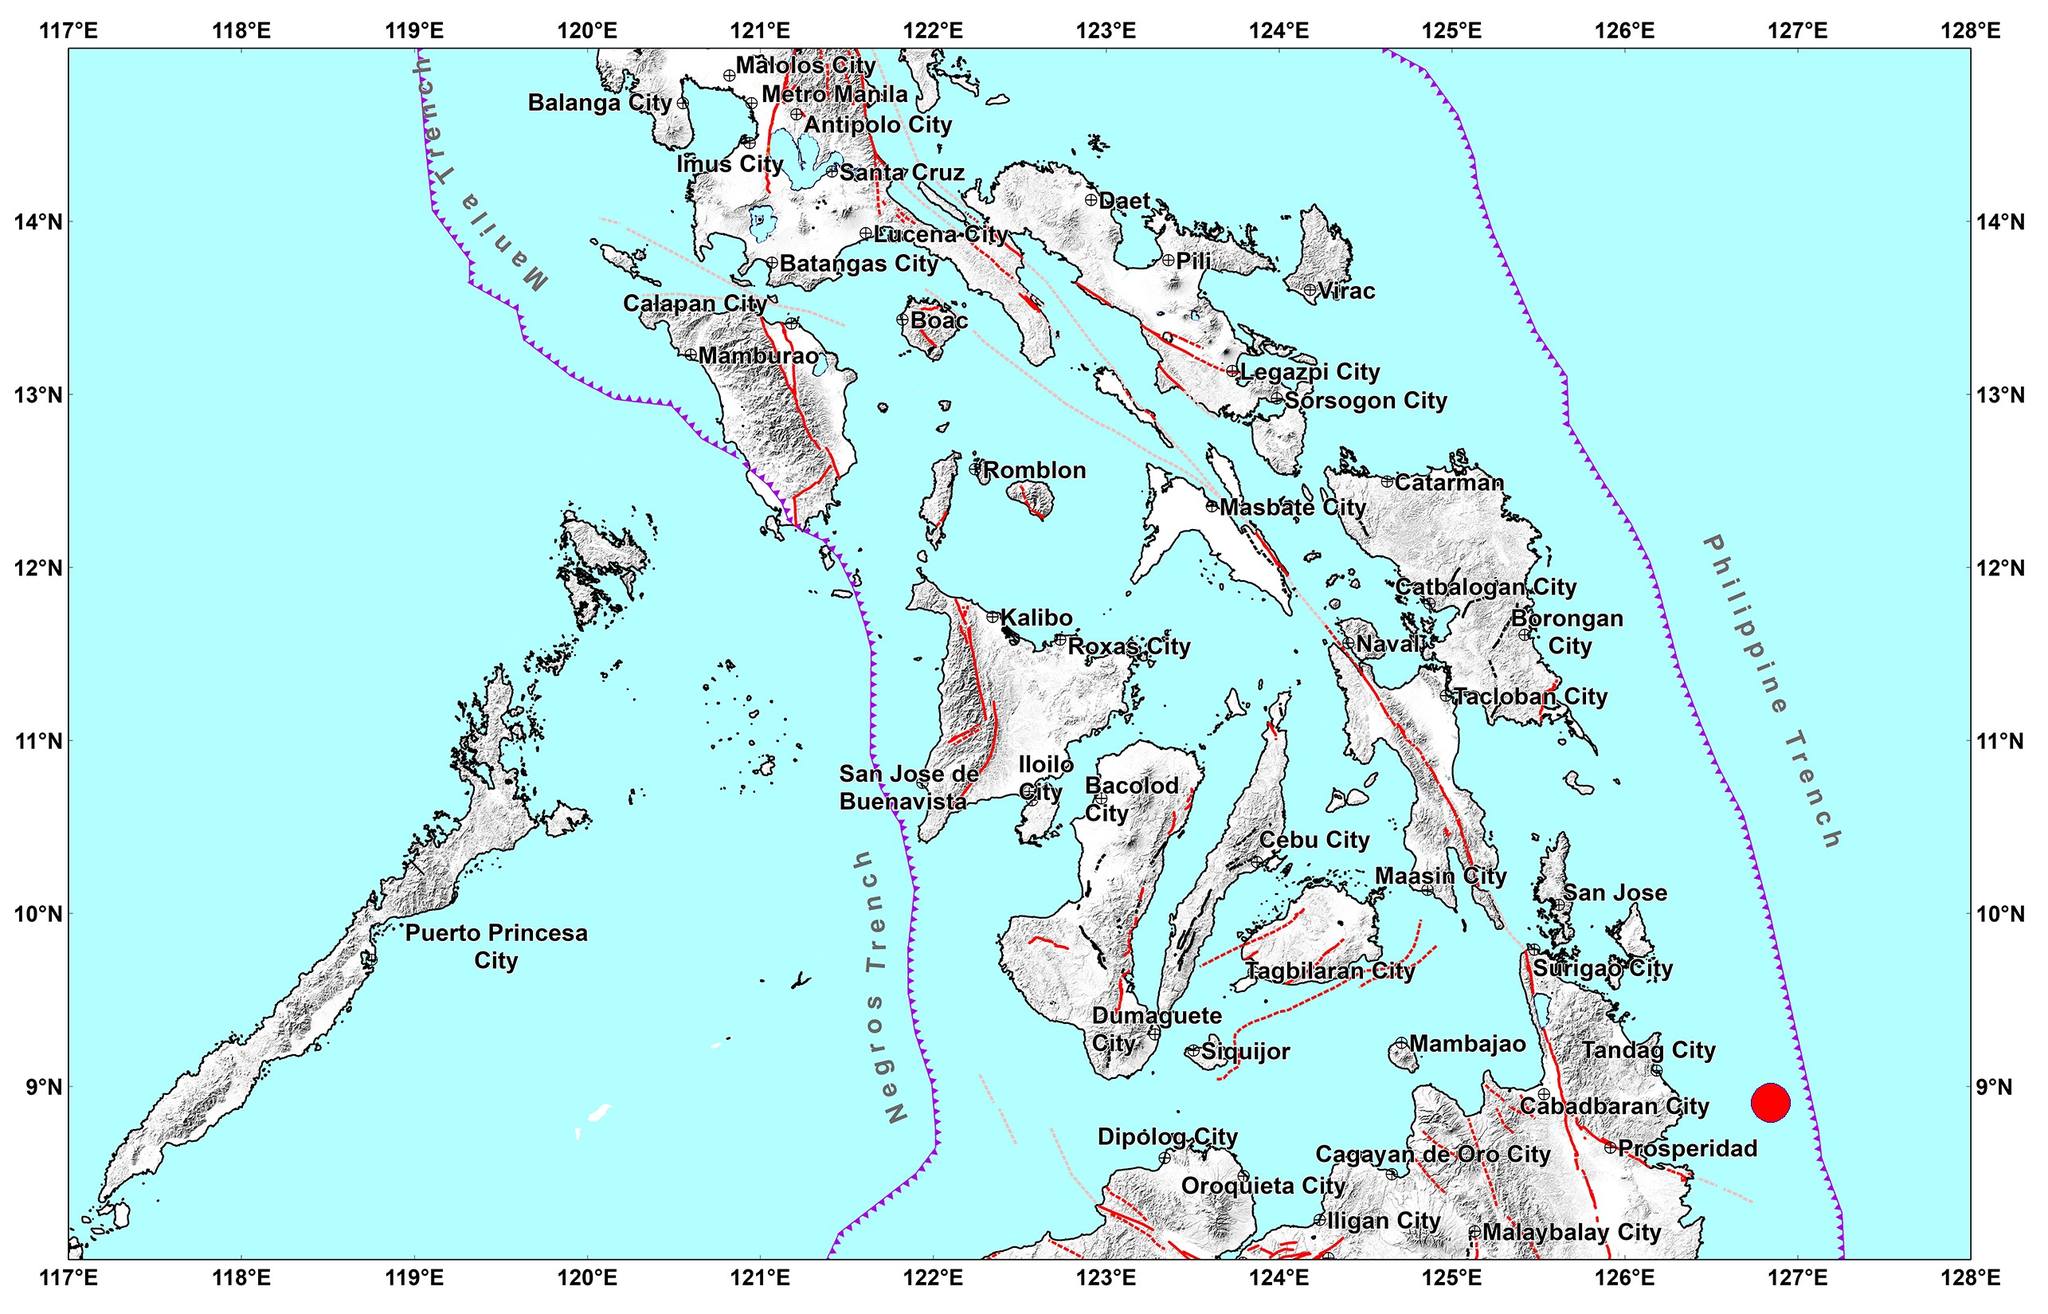 The Philippine Institute of Volcanology and Seismology says that a magnitude 5.6 earthquake hit the municipality of Hinatuan in Surigao del Sur on Thursday morning. (Photo courtesy of Phivolcs)